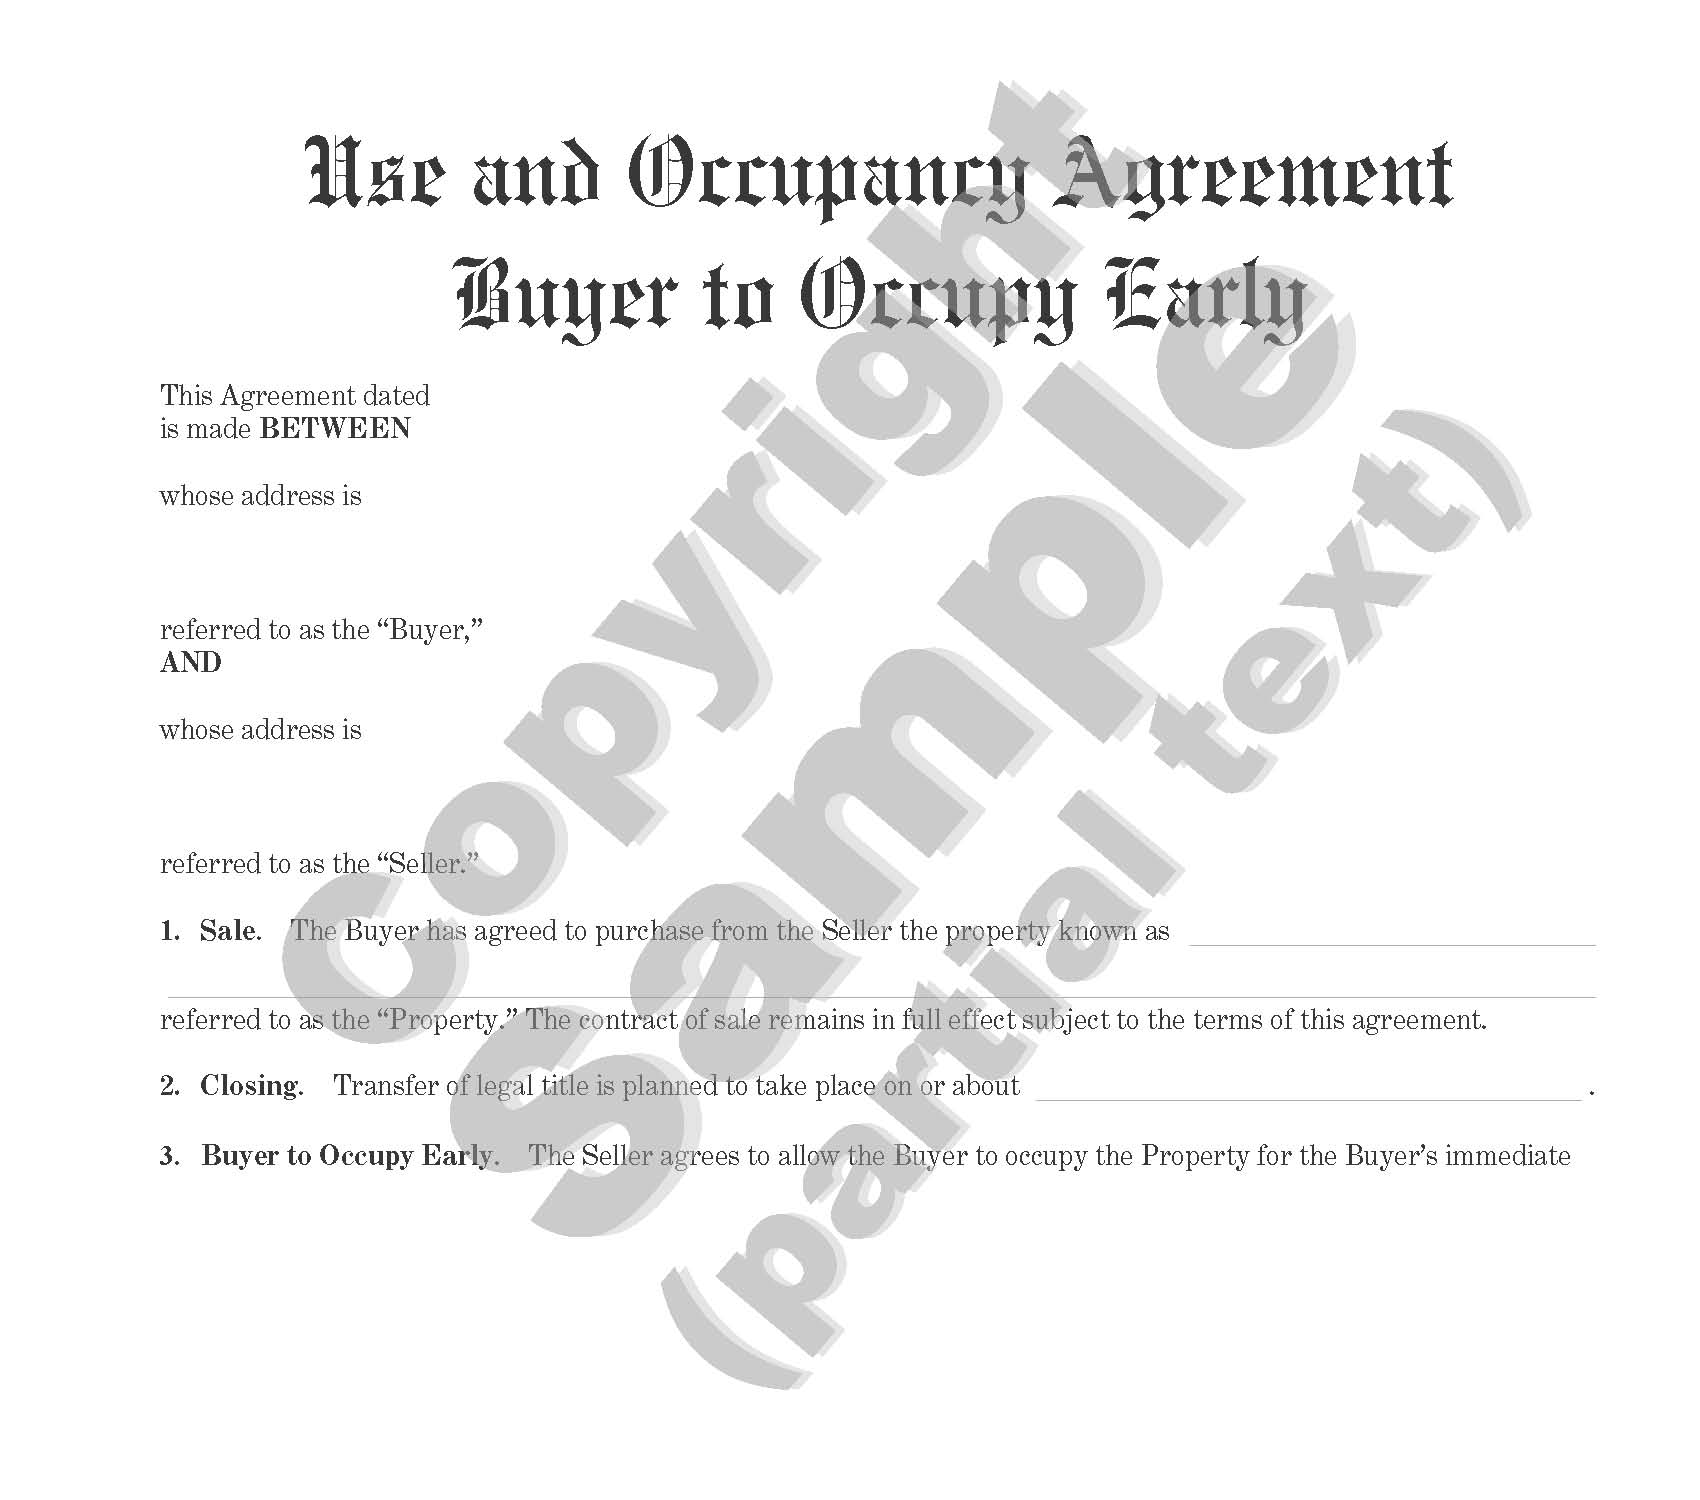 Use and Occupancy Agreement - Buyer to Occupy Early - Plain Language